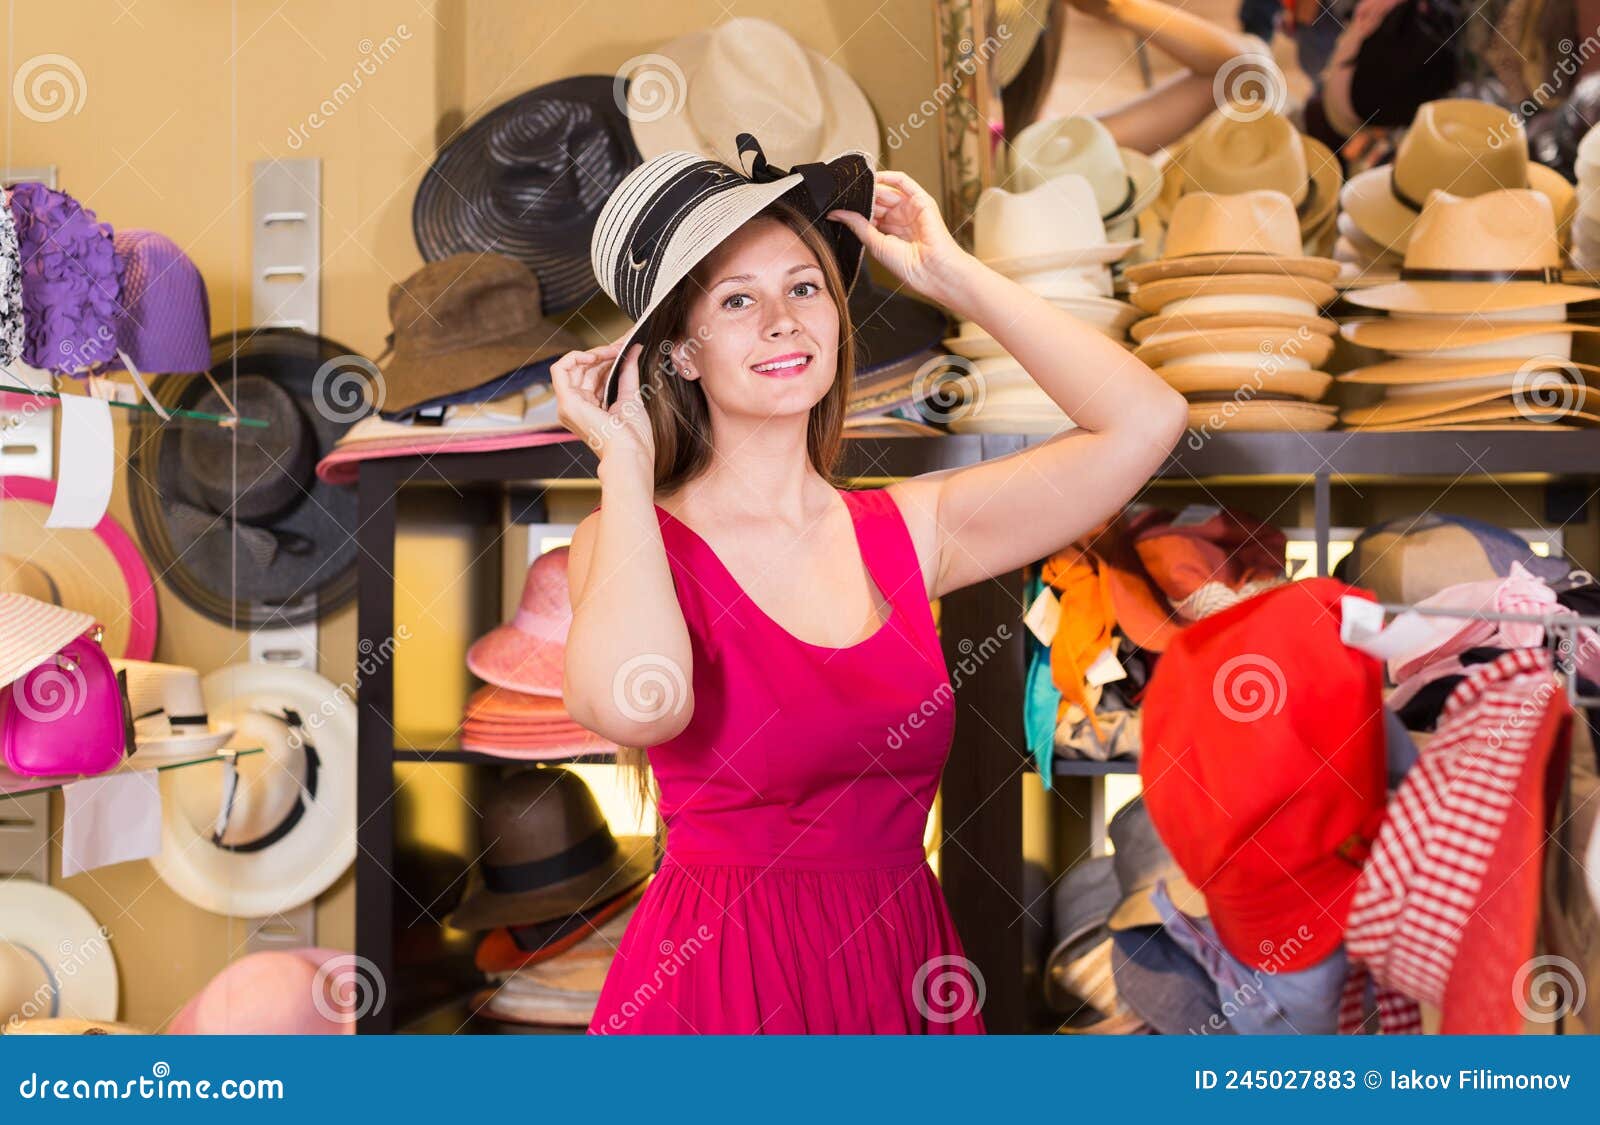 Adult Woman Try on Hatinator Hat in Shopping Mall Stock Image - Image ...